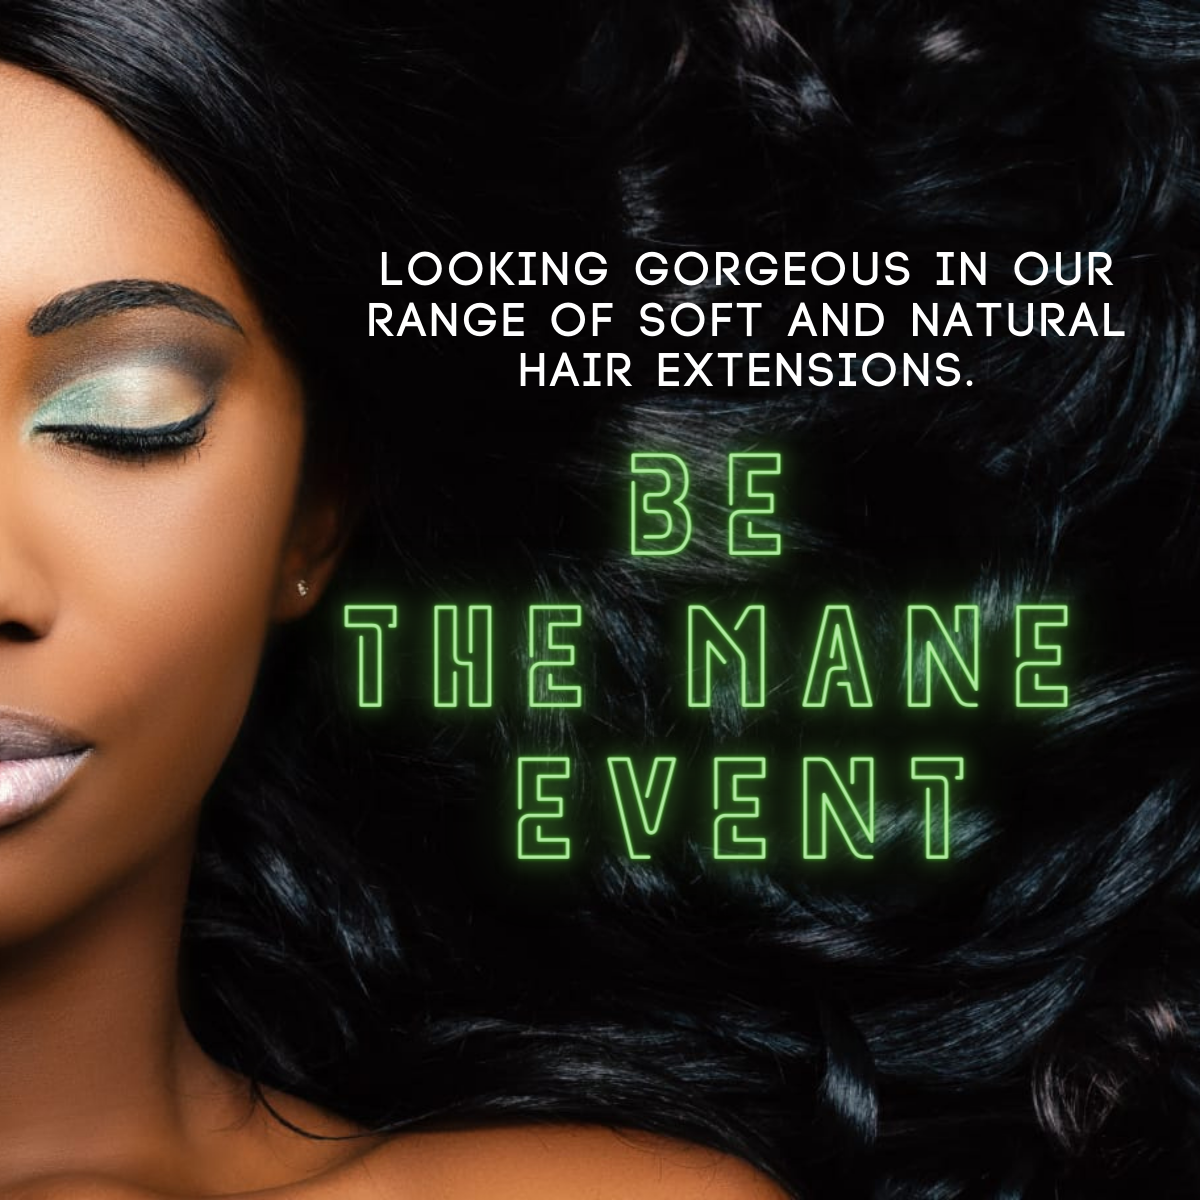 Be The Mane Event. My Gem Hair, Suppliers of high quality Virgin, Raw, Human Hair, Frontals and Lace Closures